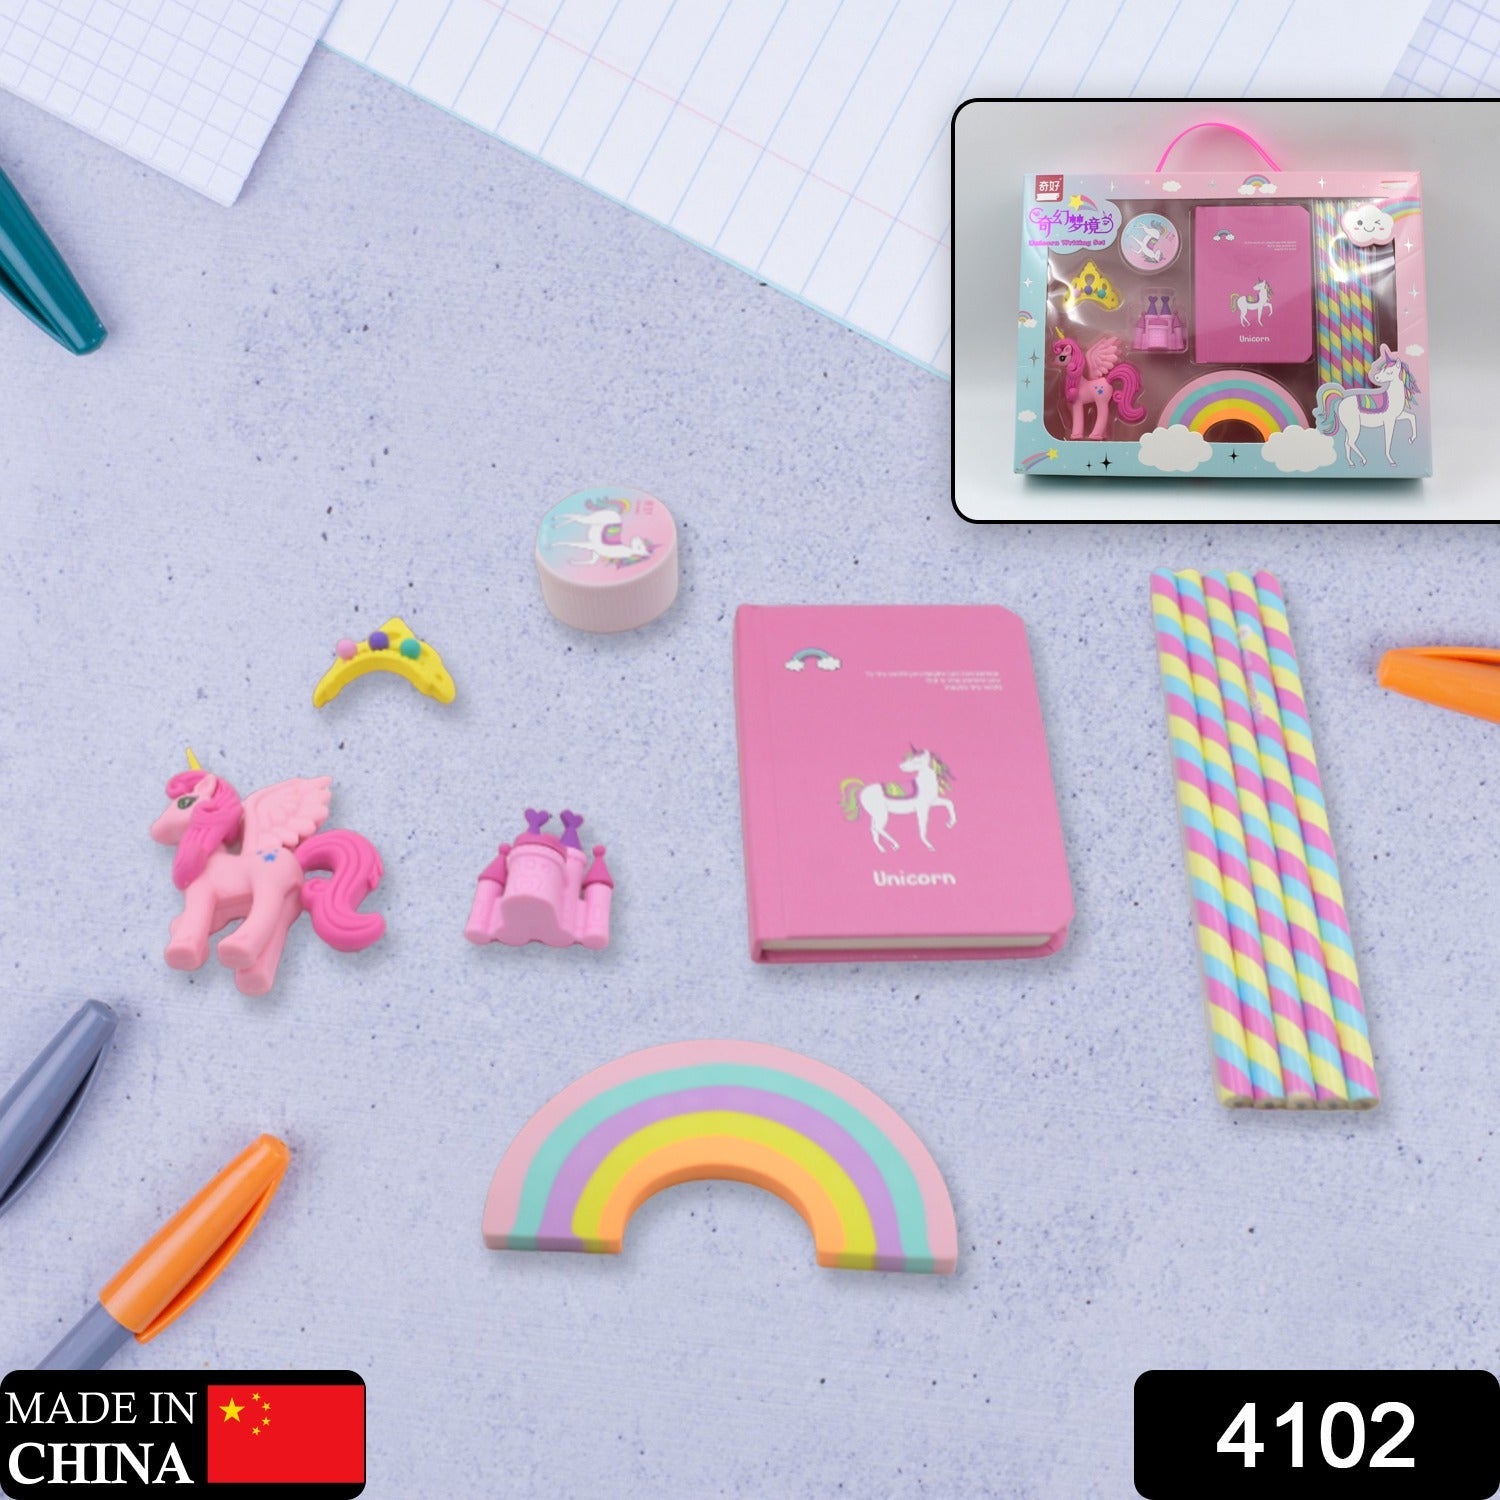 Unicorn Stationery Writing Set - Unicorn Diary, Pencils, Sharpener, Unique Erasers for Girls Ages 4-11 Years Old Birthday Party Return Gift Set for Girls Kids (11 Pc Set)